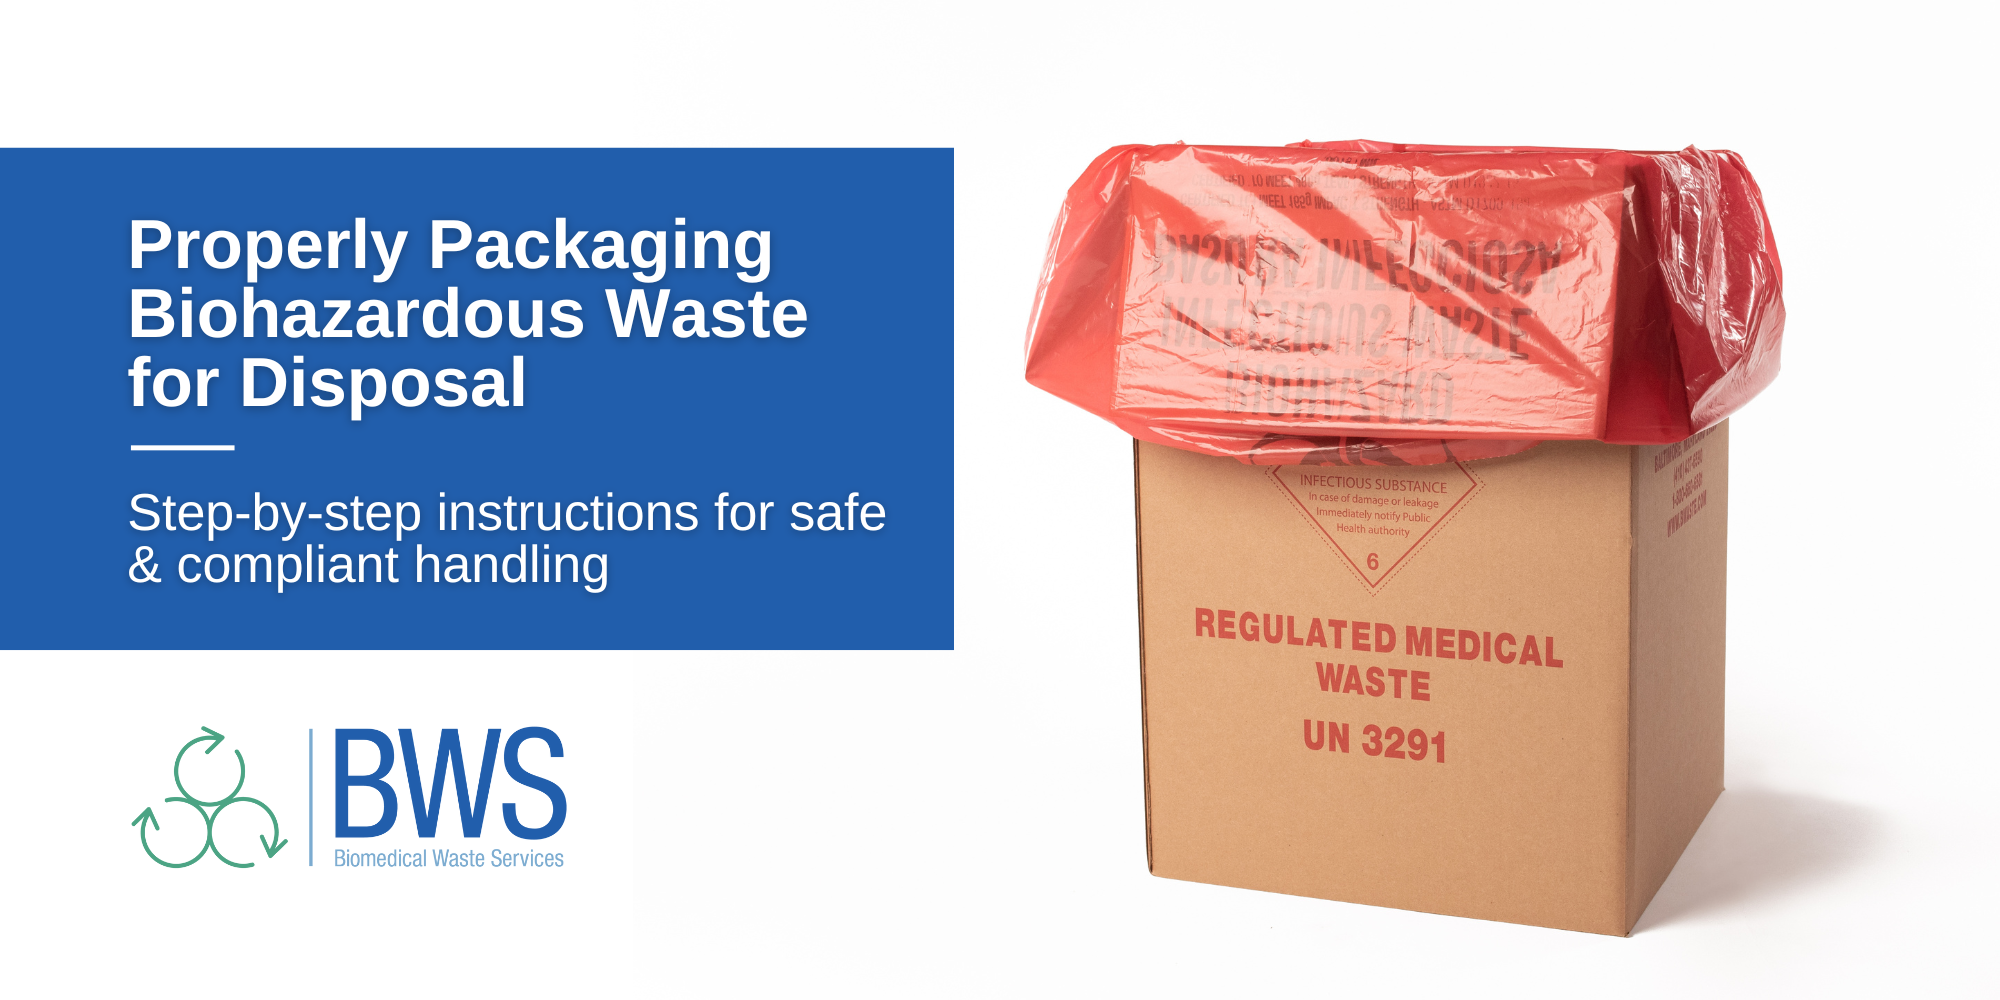 Properly Packaging Biohazardous Waste for Safe Disposal